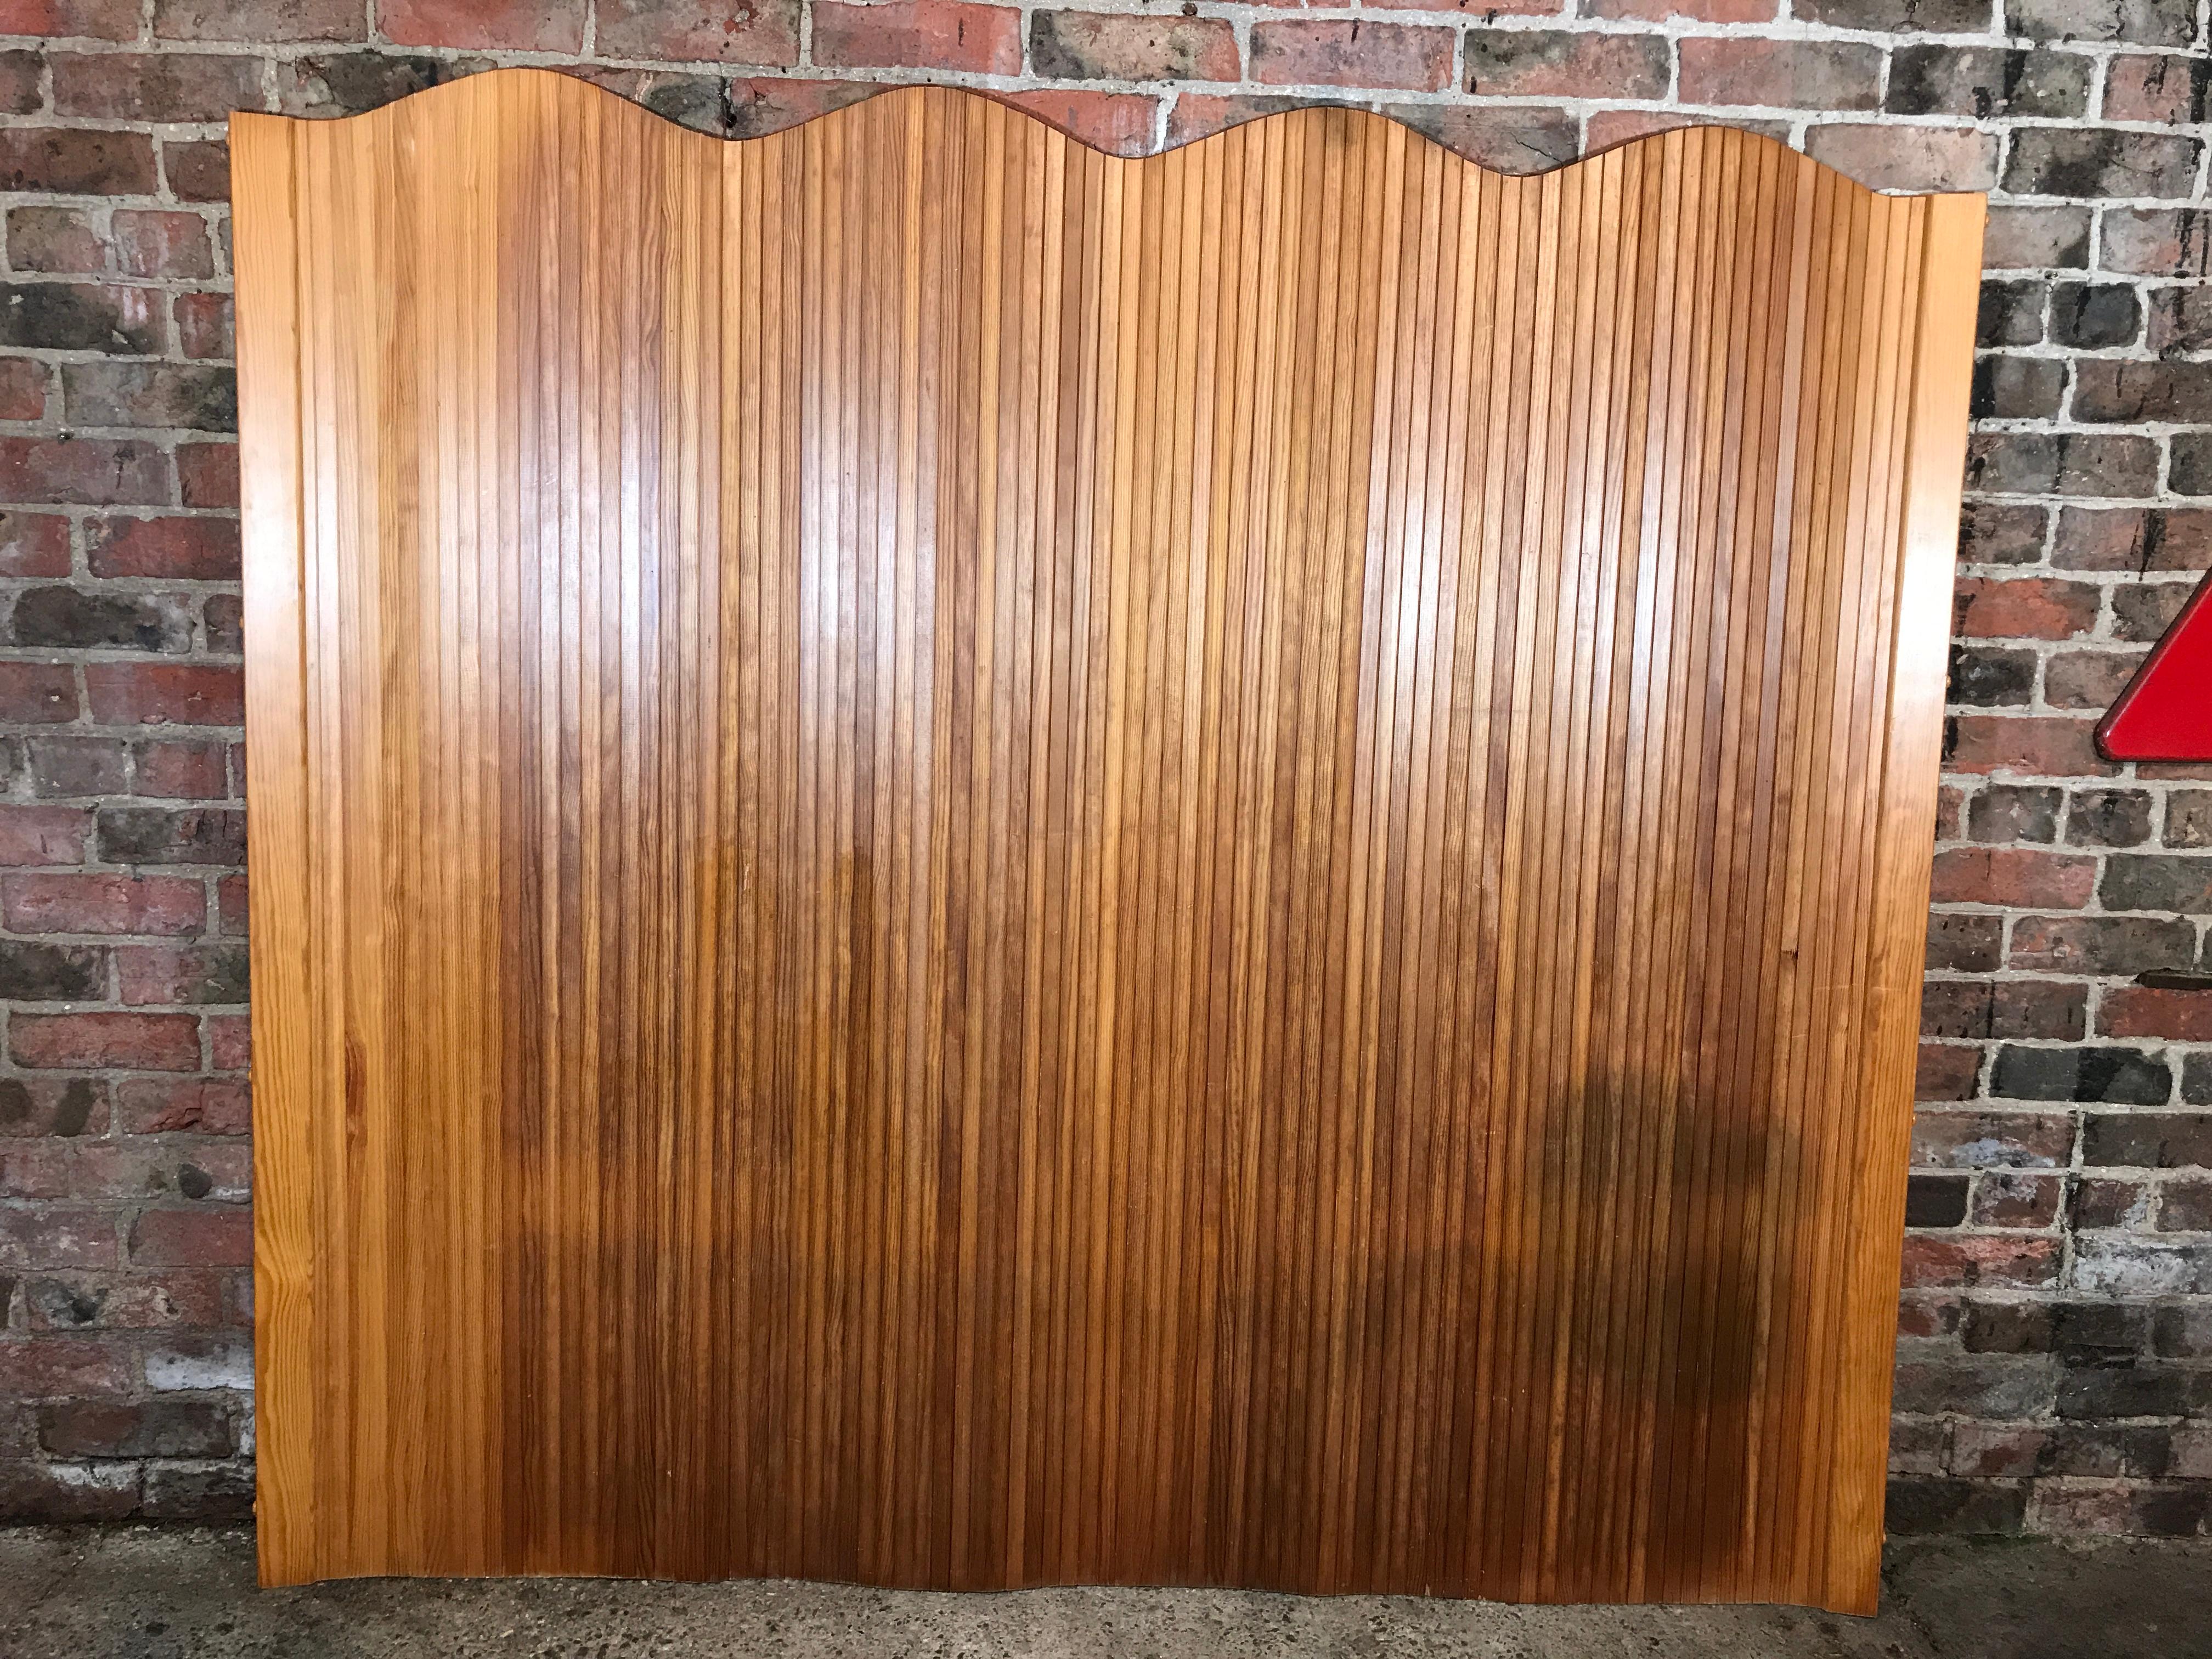 Screen 100 vintage pinewood room divider by Alvar Aalto in very good condition.

The Screen 100 is a room divider designed by Alvar Aalto in 1936. The Screen 100 consists of thin pinewood strips that give it a flowing and flexible structure – you